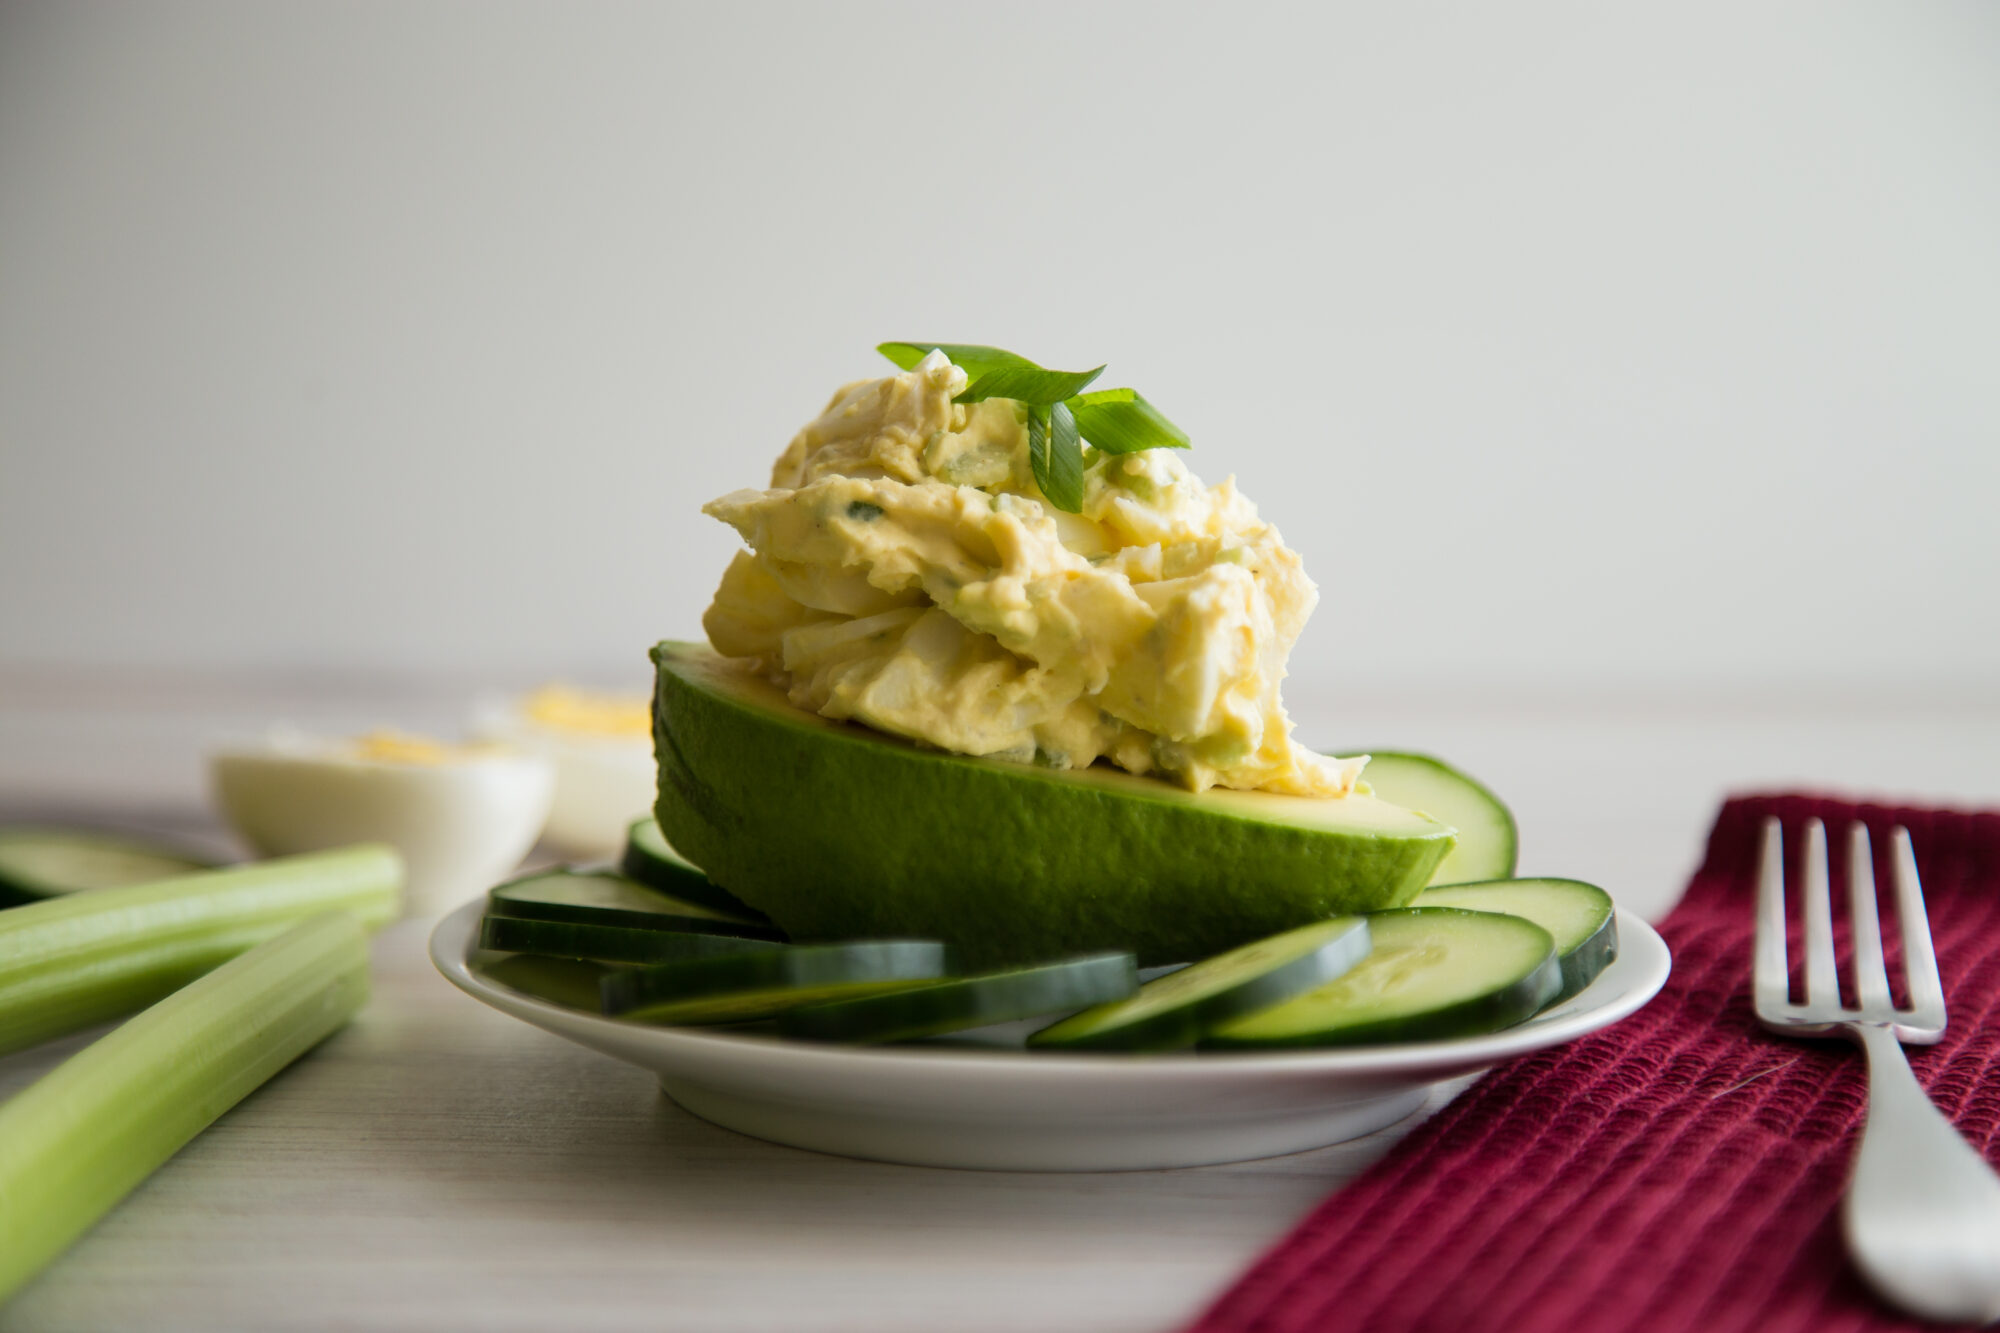 Close up view- Egg salad on a half an avocado, surrounded by sliced cucumber on a white plate